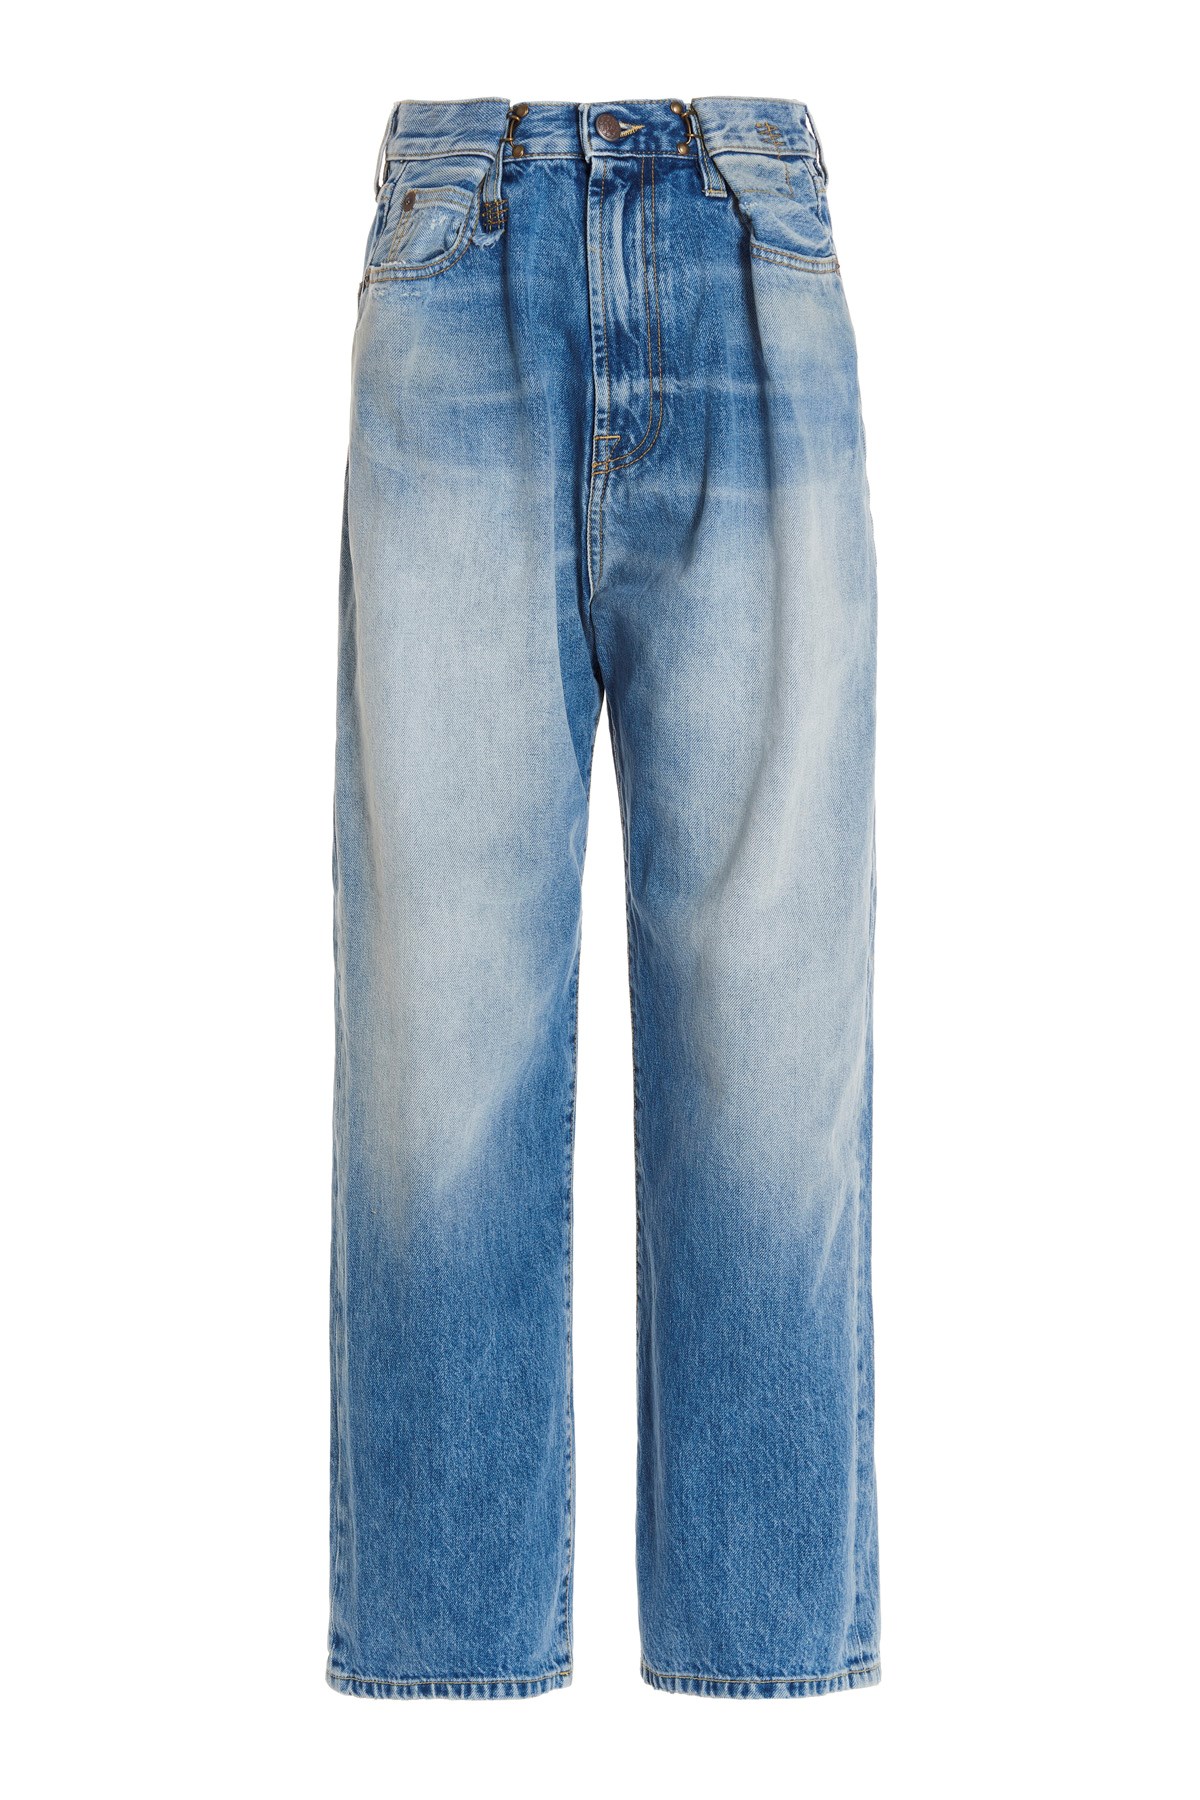 R13 Jeans 'Fold Over'